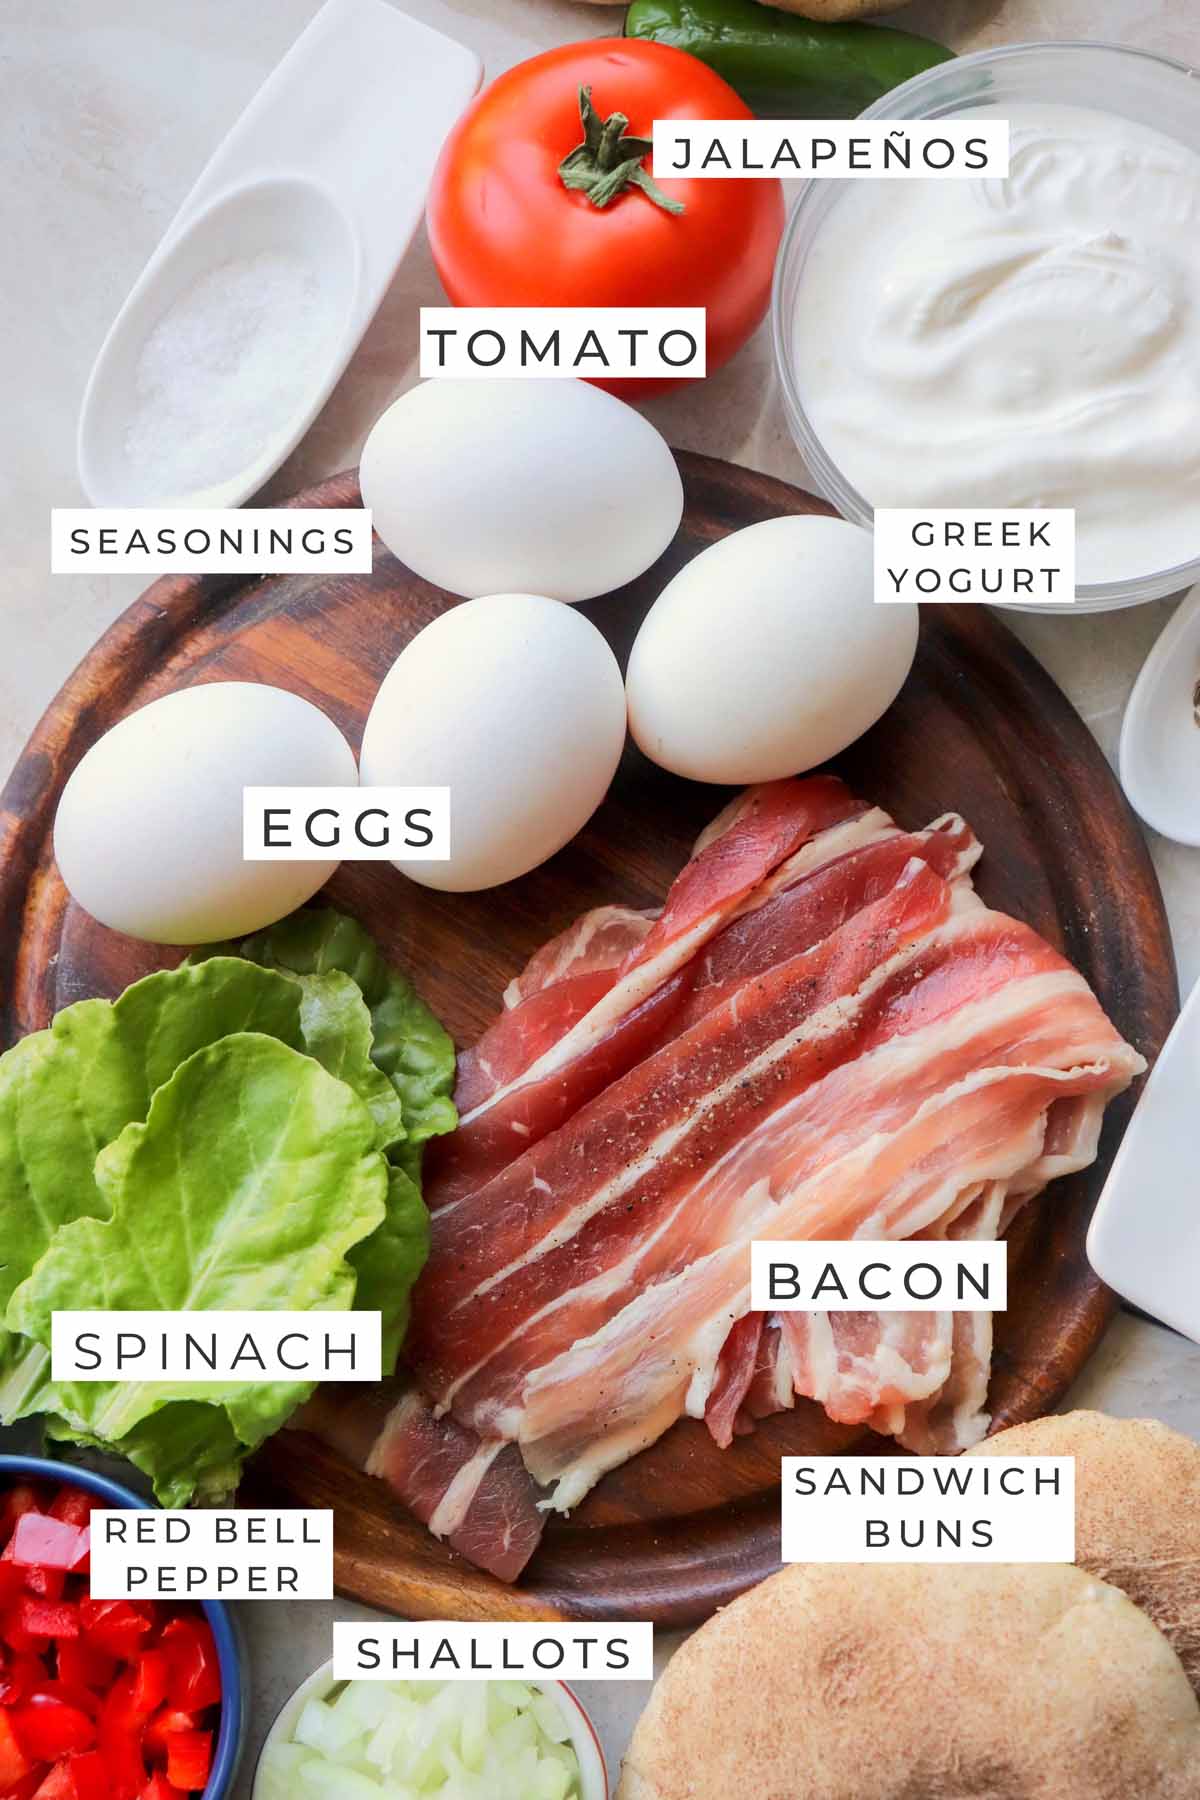 Labeled ingredients for the breakfast sandwich.